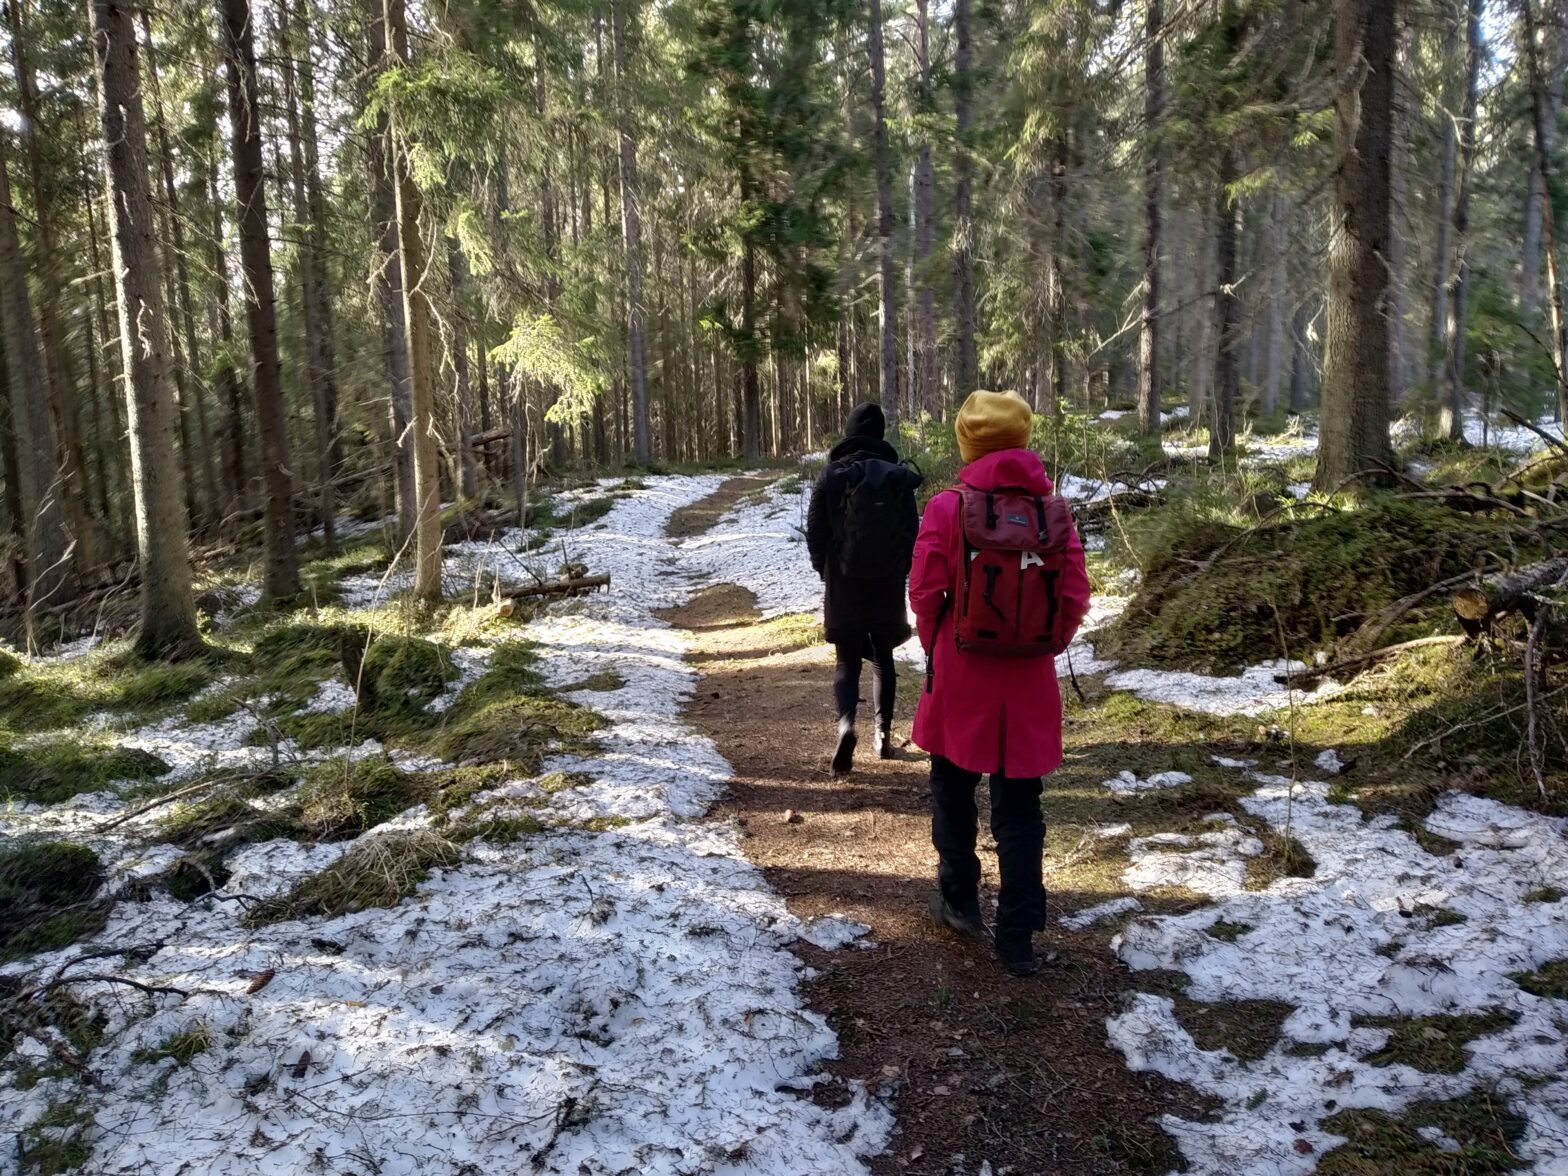 Two people walk on a path in the forest